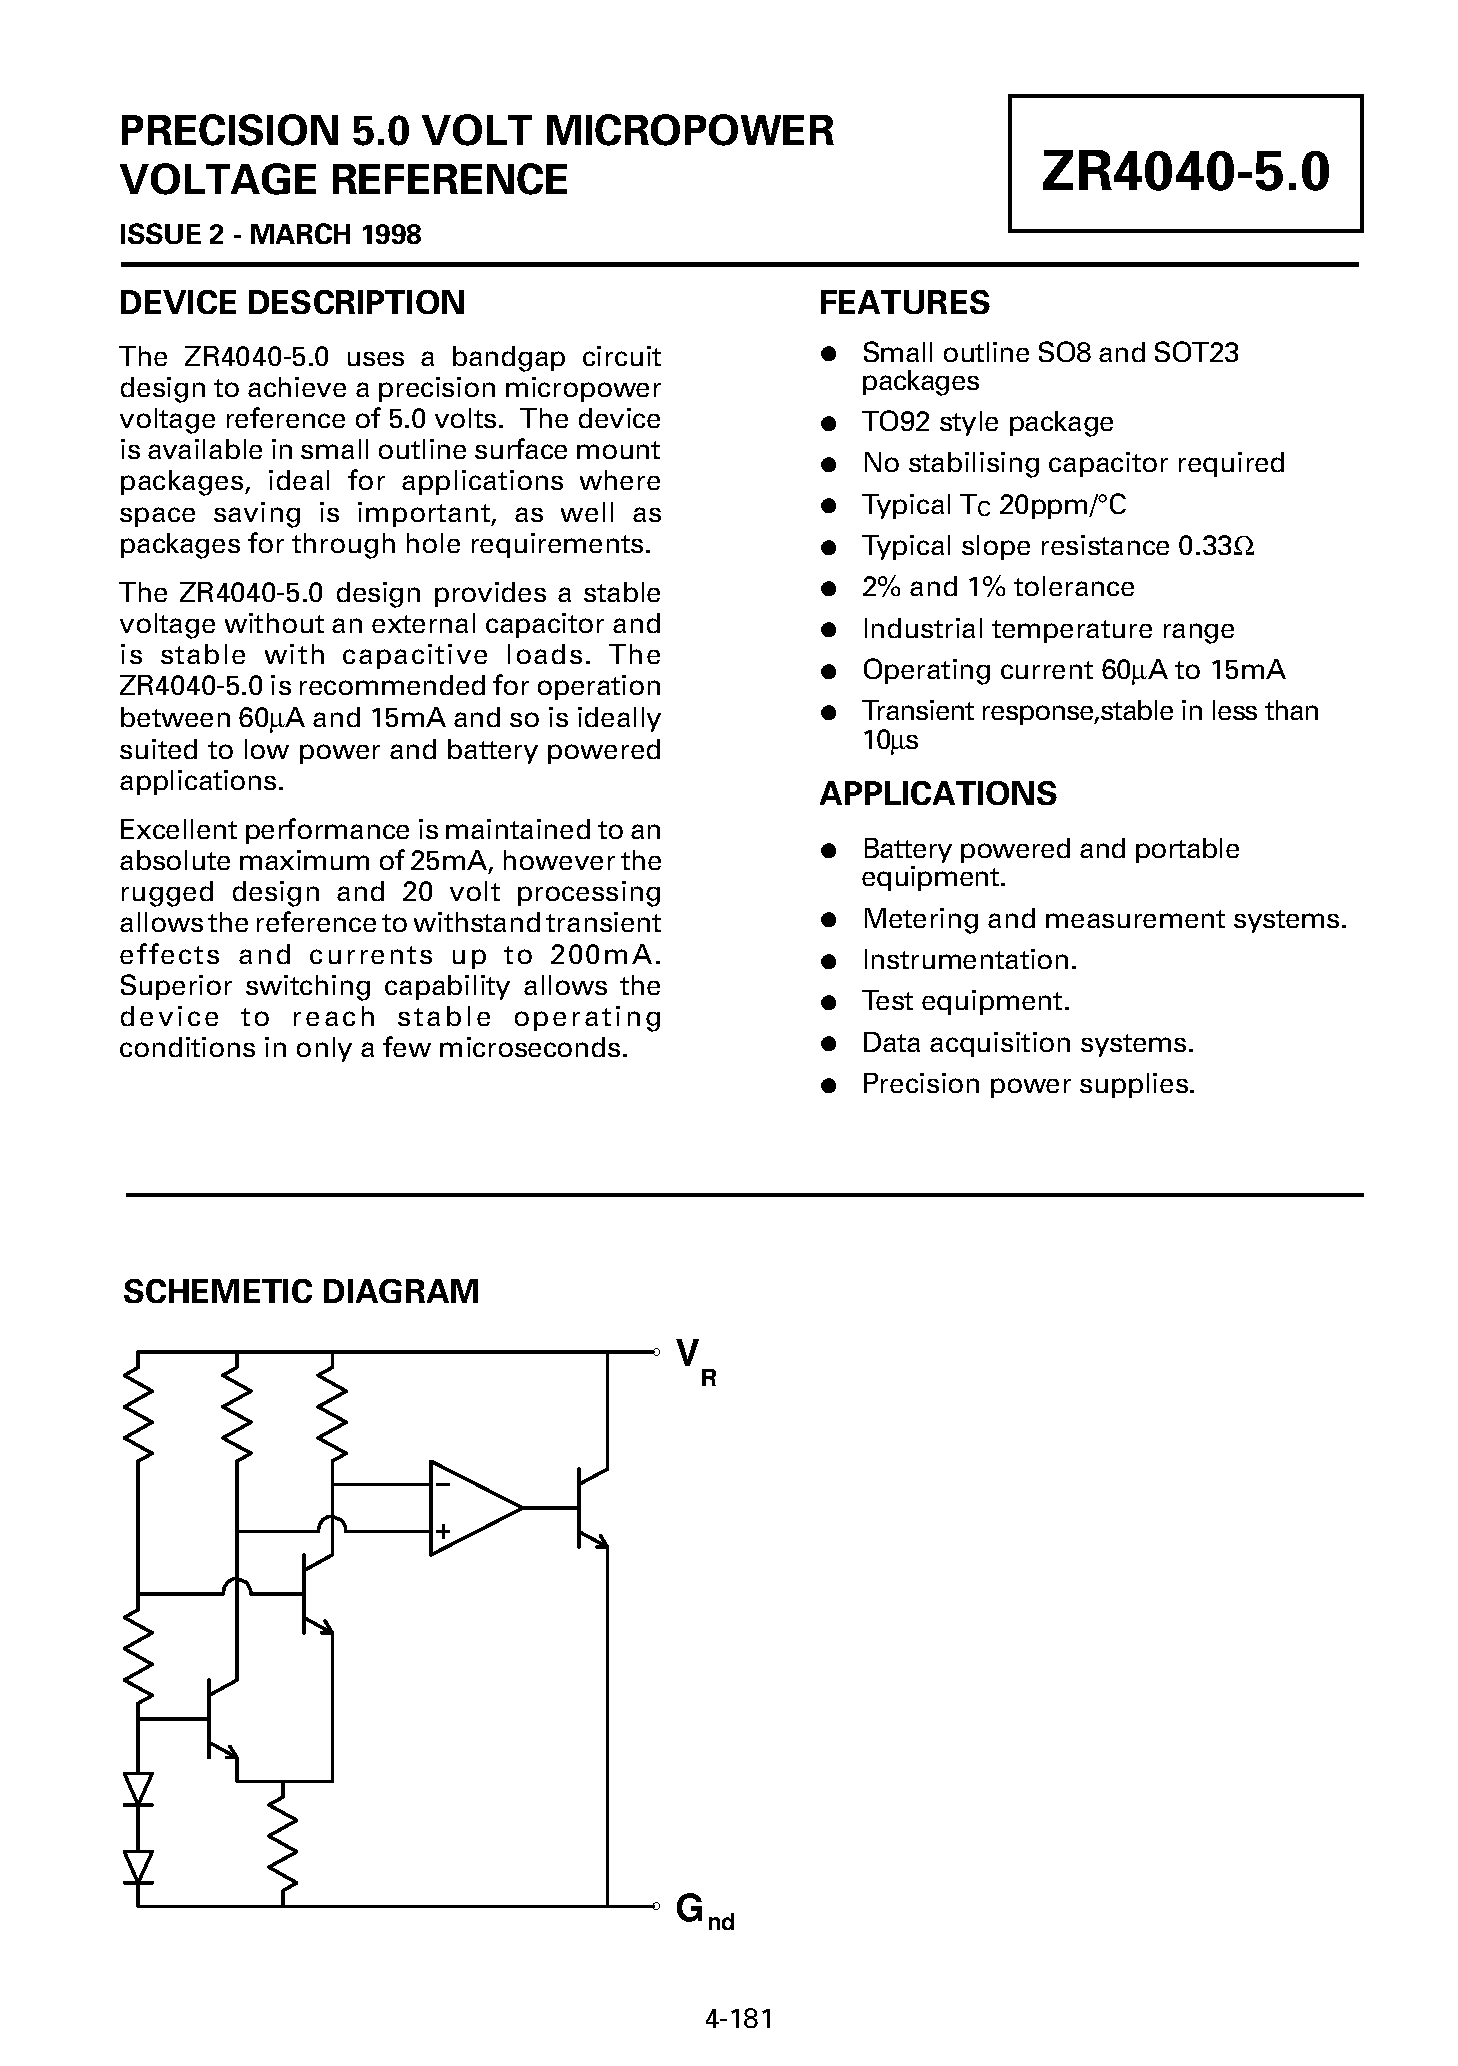 Datasheet ZR40402N850 - PRECISION 5.0 VOLT MICROPOWER VOLTAGE REFERENCE page 1